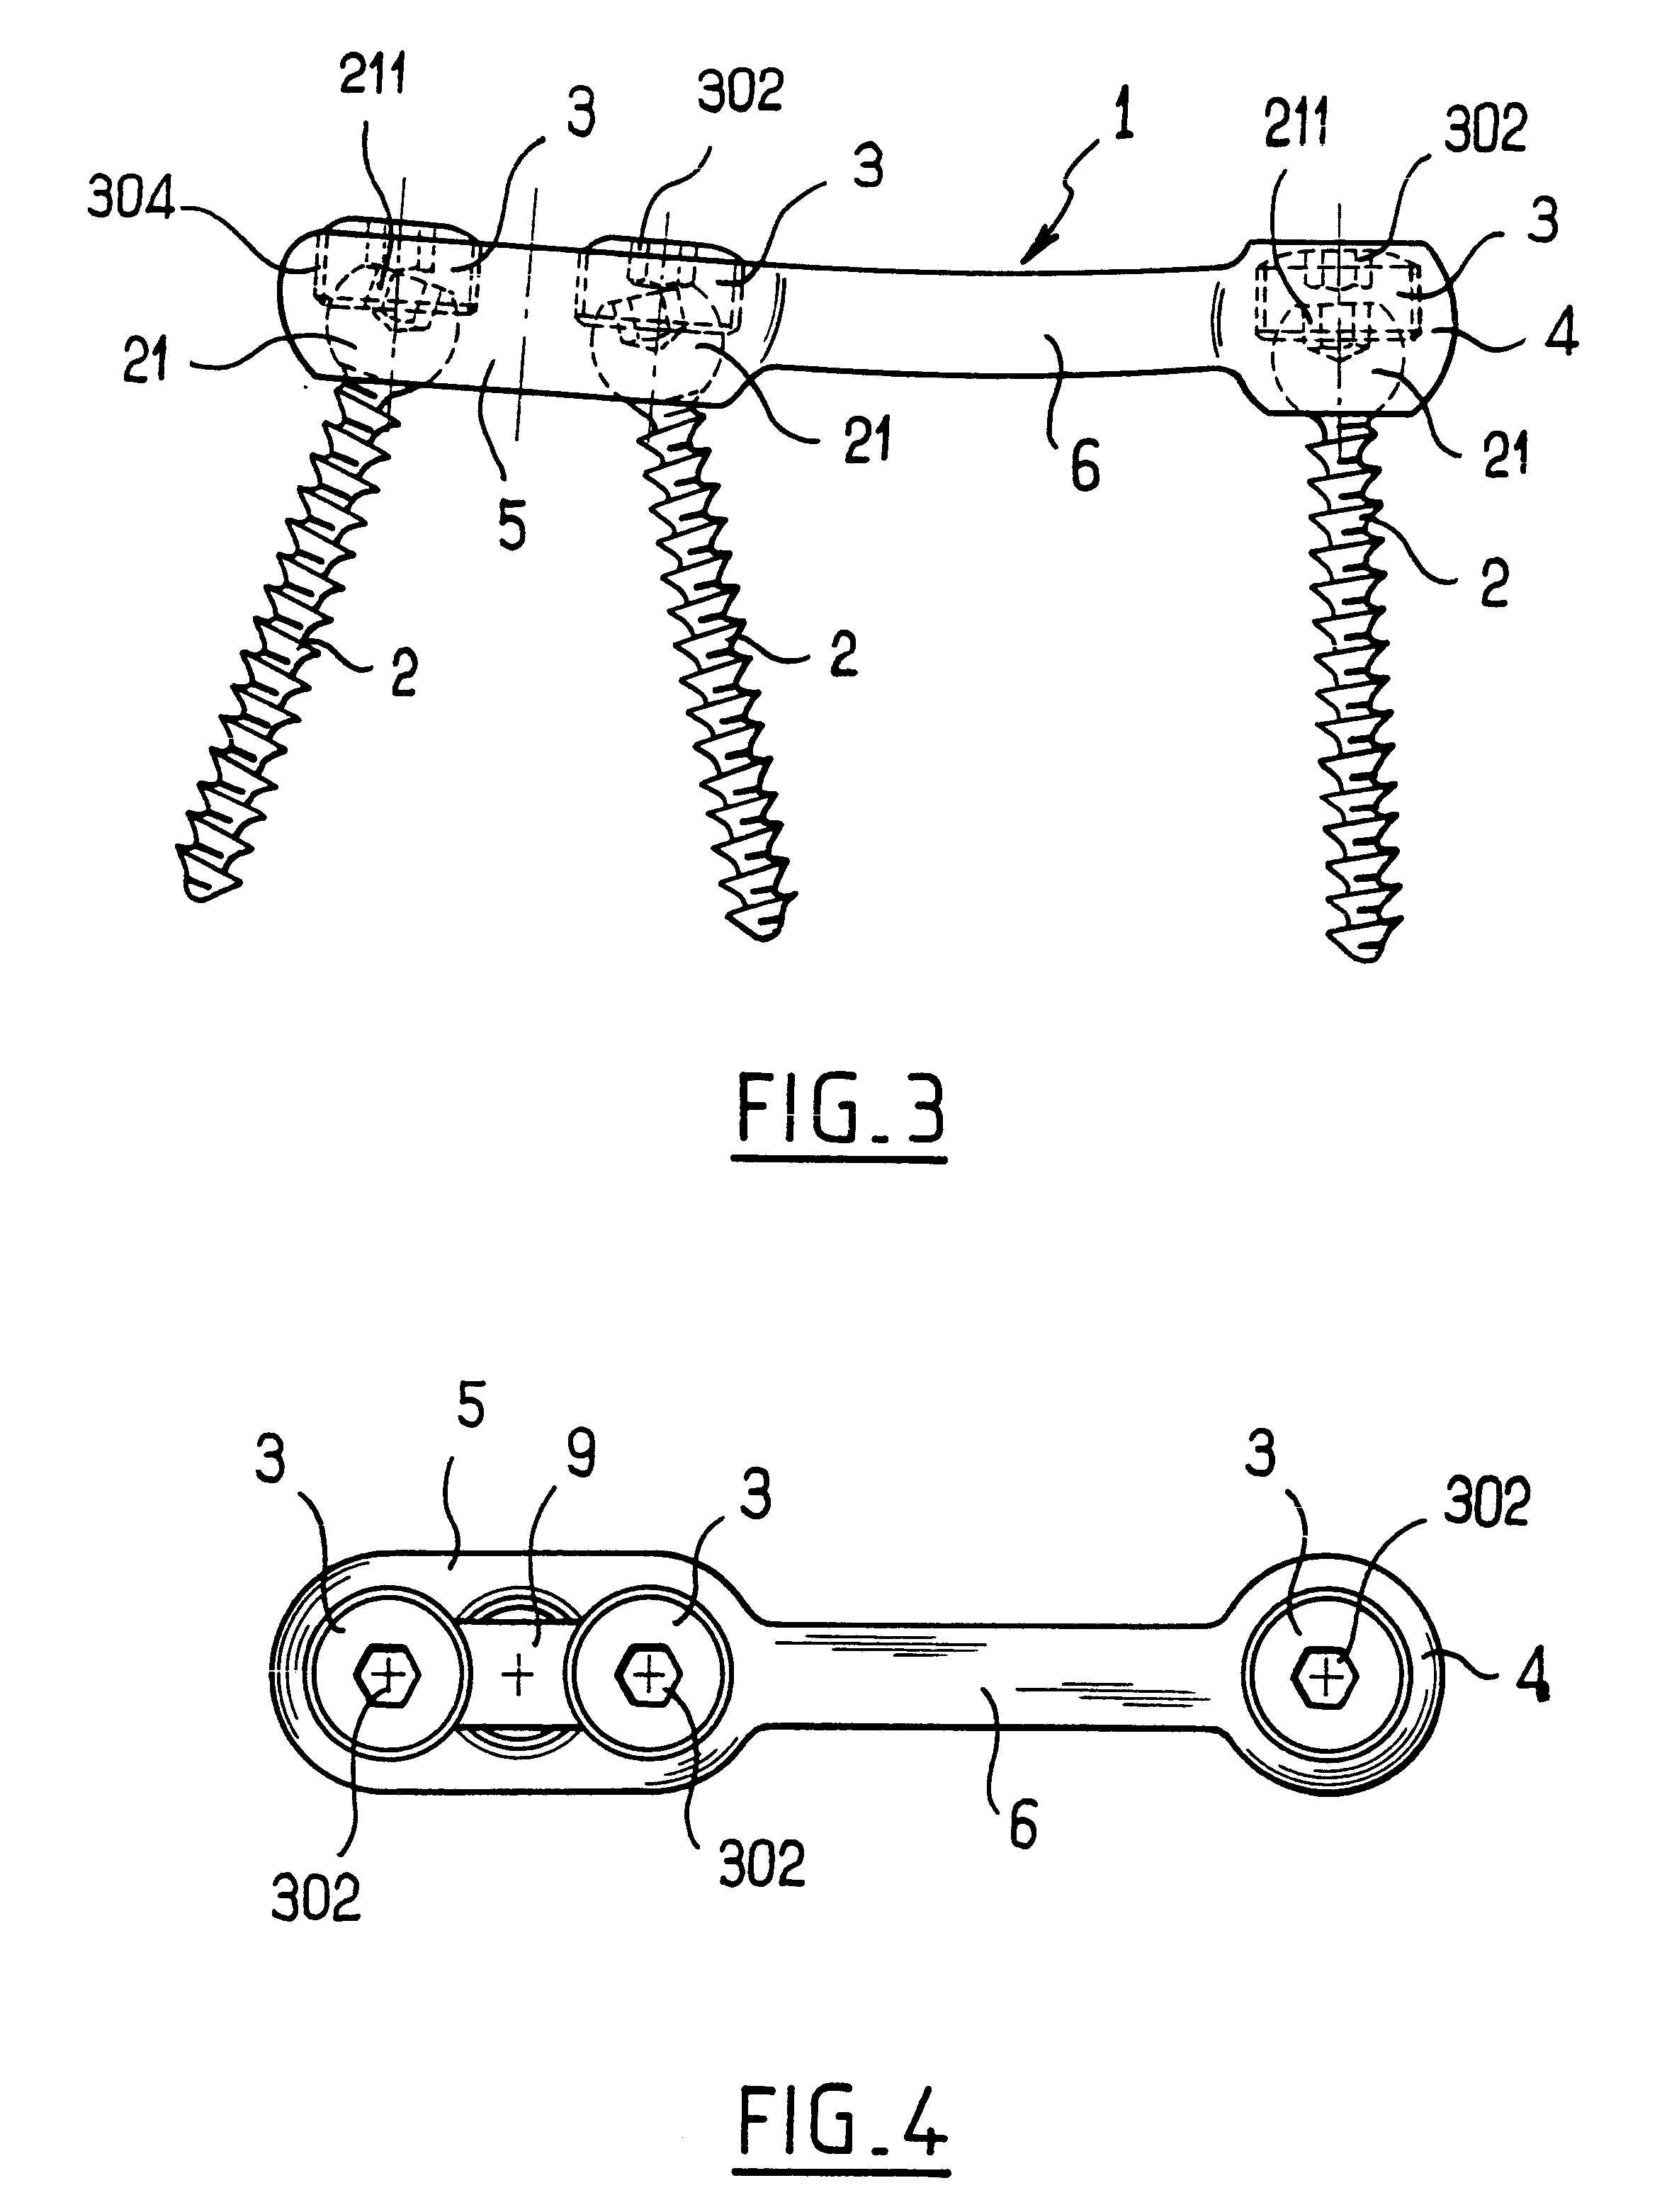 Device for fixing the sacral bone to adjacent vertebrae during osteosynthesis of the backbone